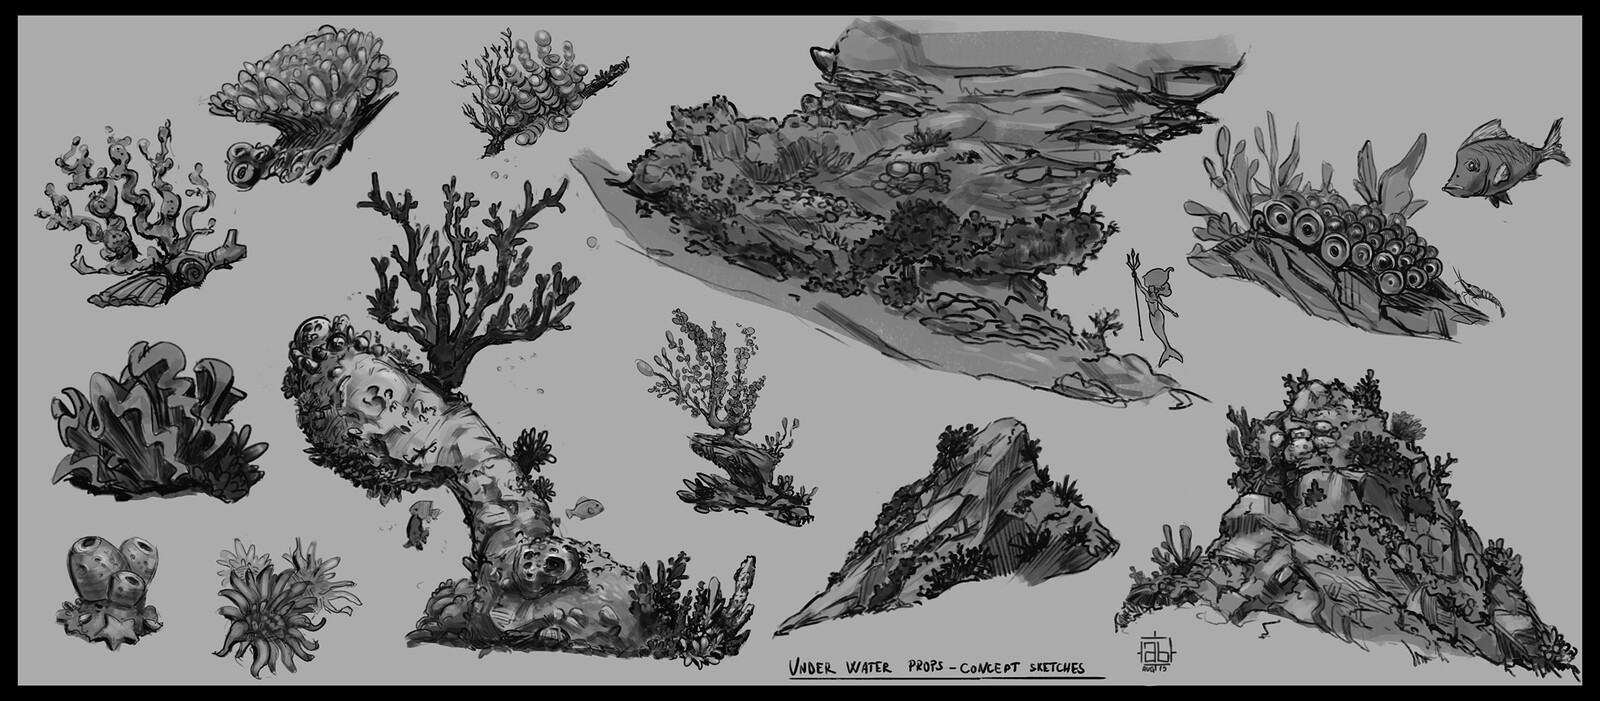 Under Water Props - Sketches